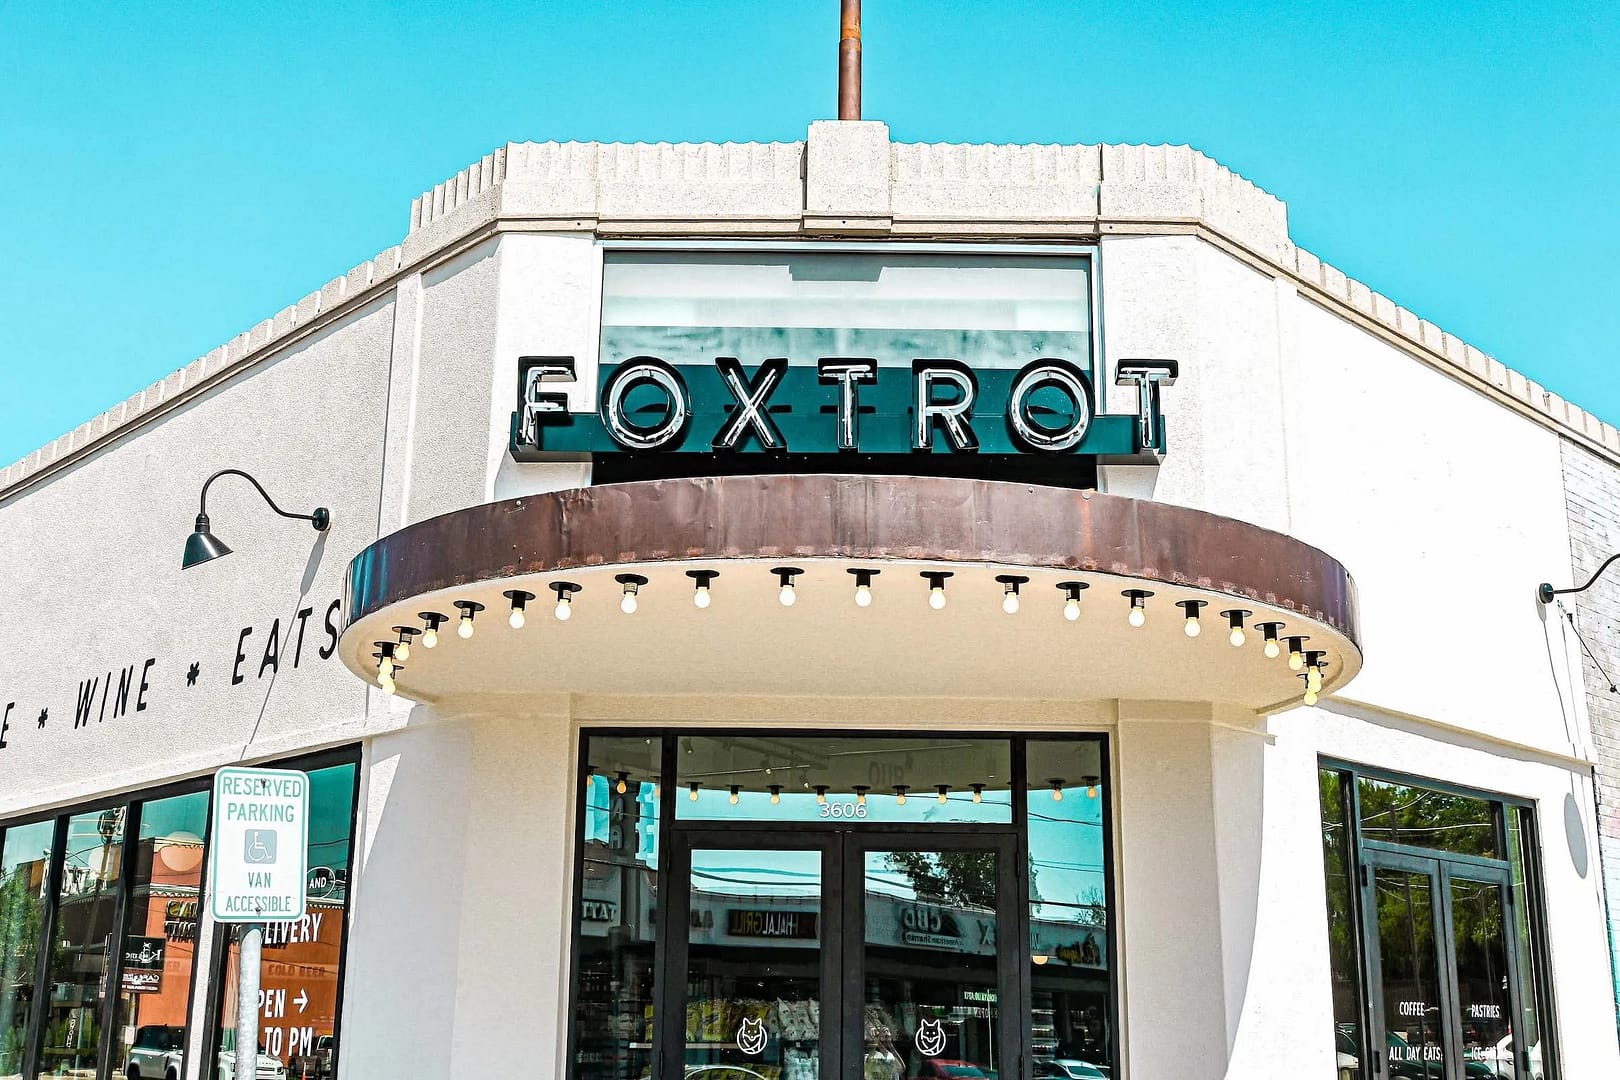 Foxtrot expands with Occupier